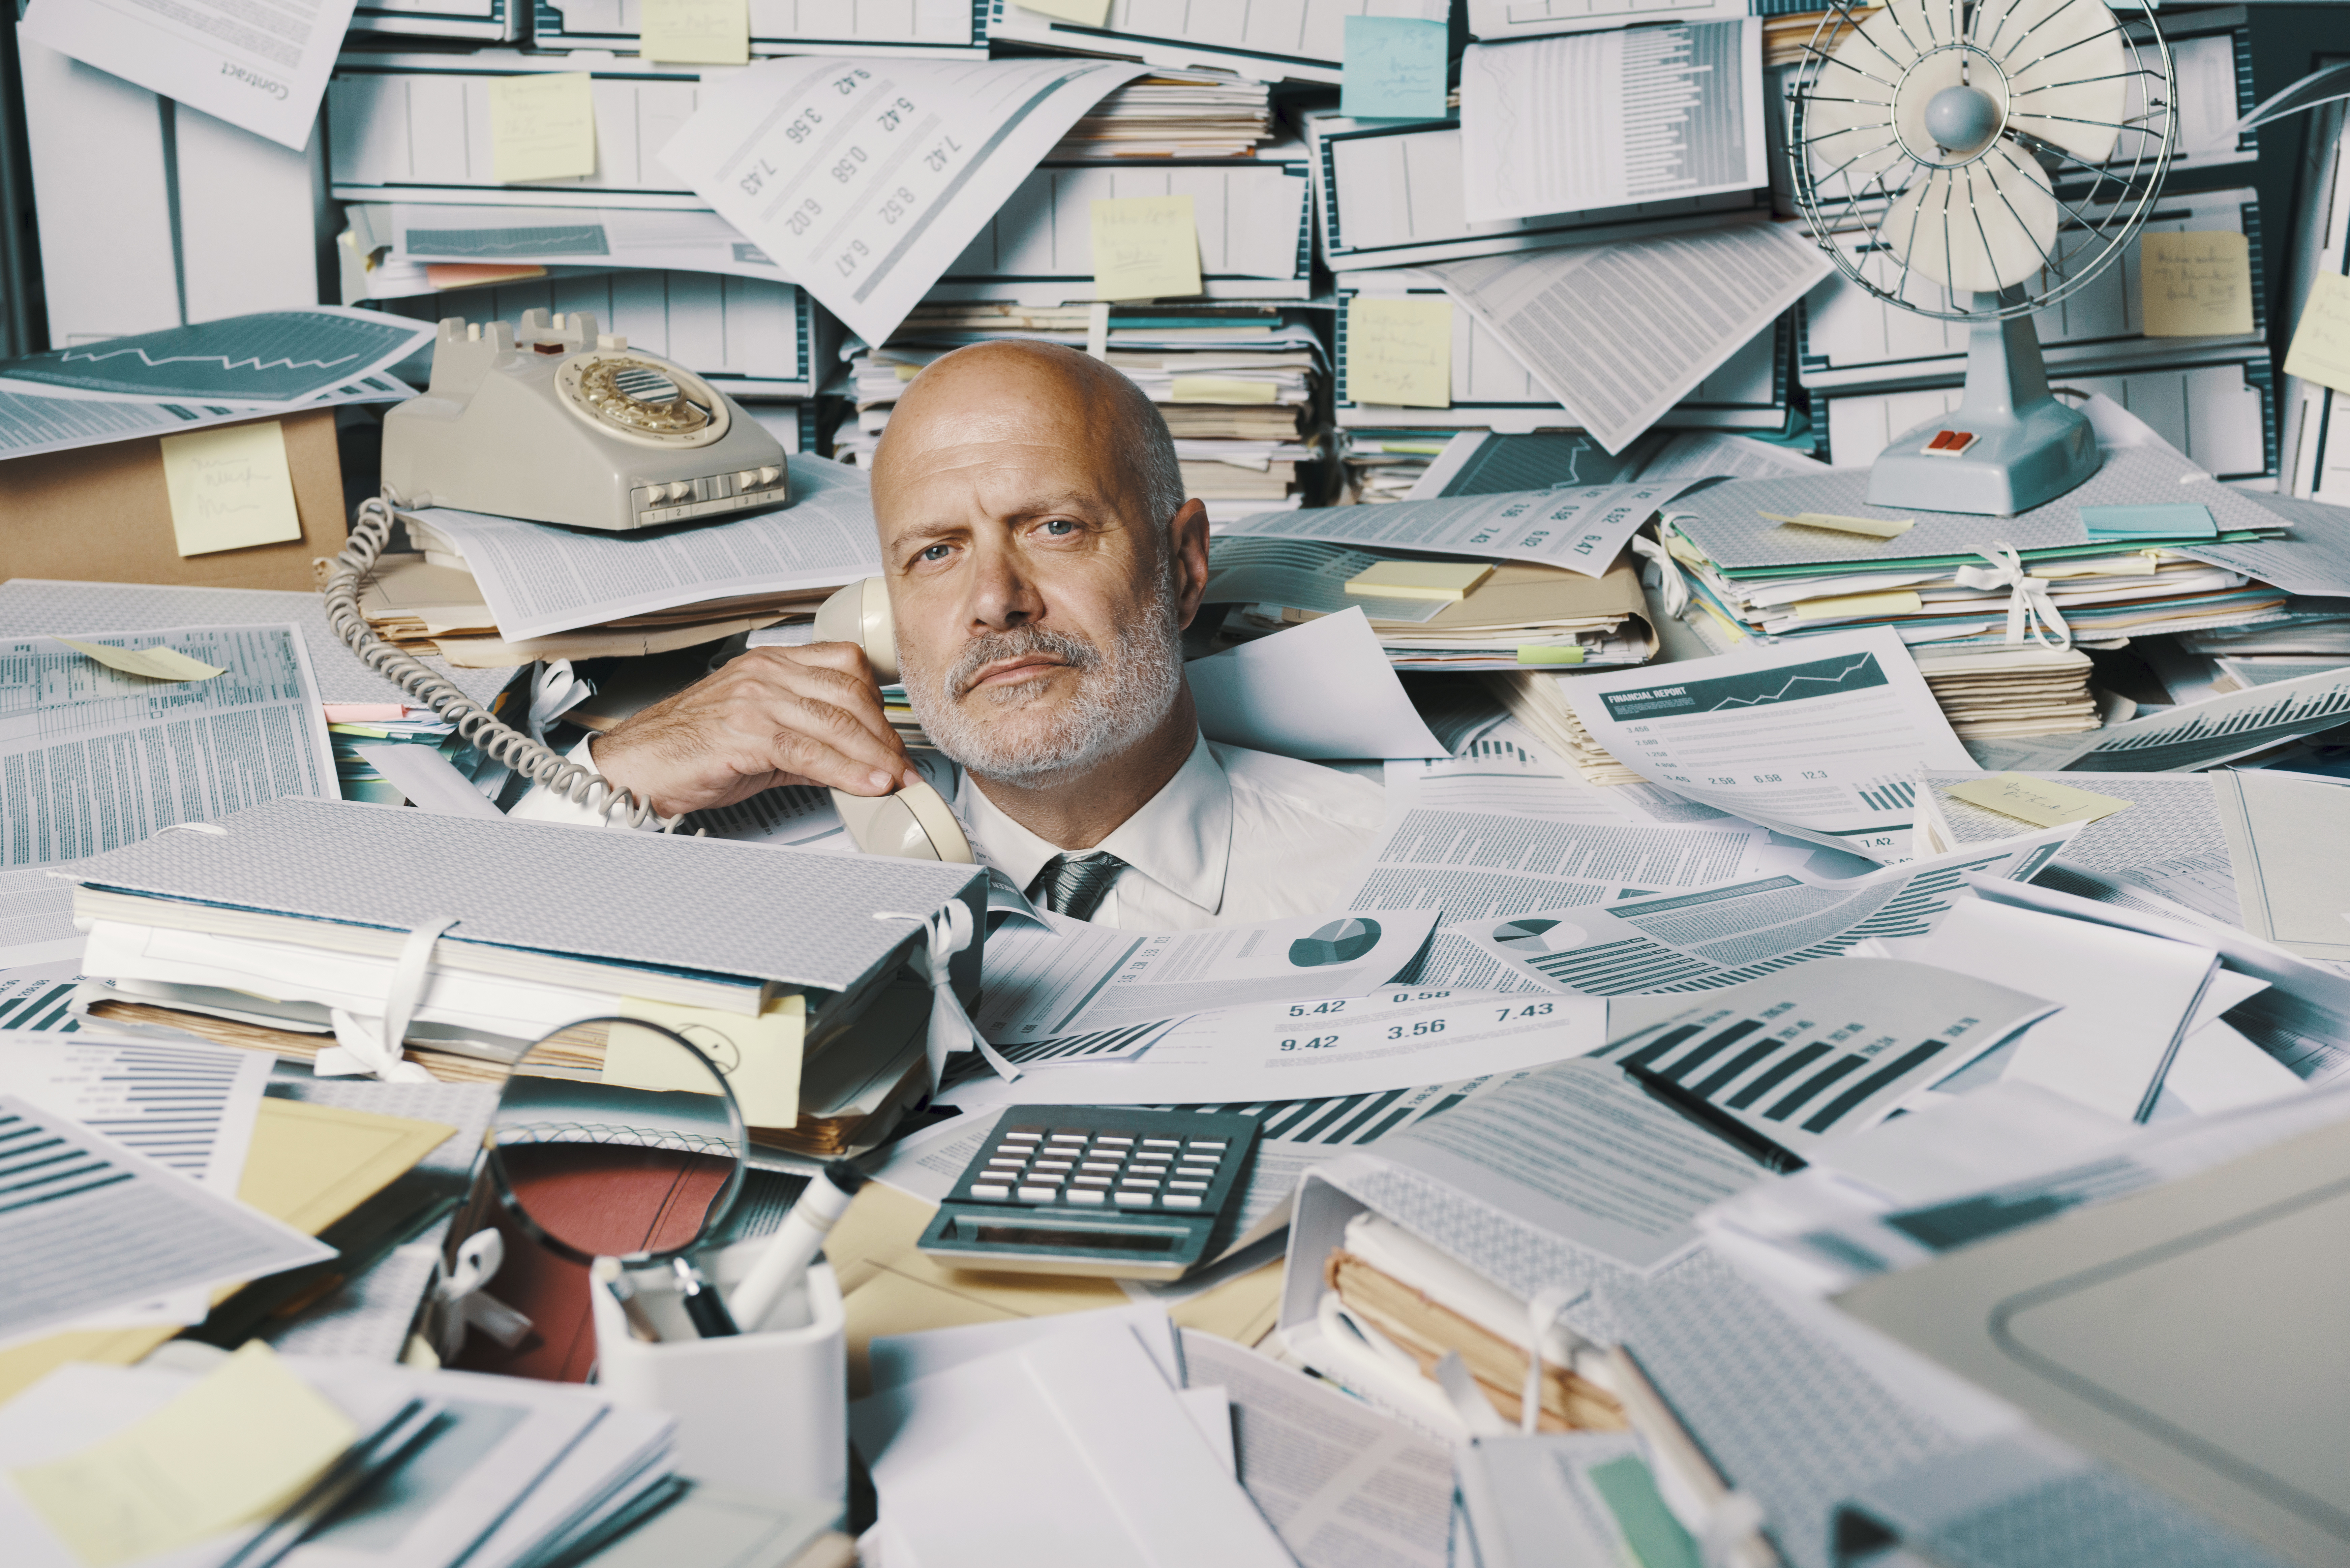 Photo of a businessman looking at the camera, holding the receiver of a rotary phone, buried up to his neck in papers, books, and other office paraphernalia.